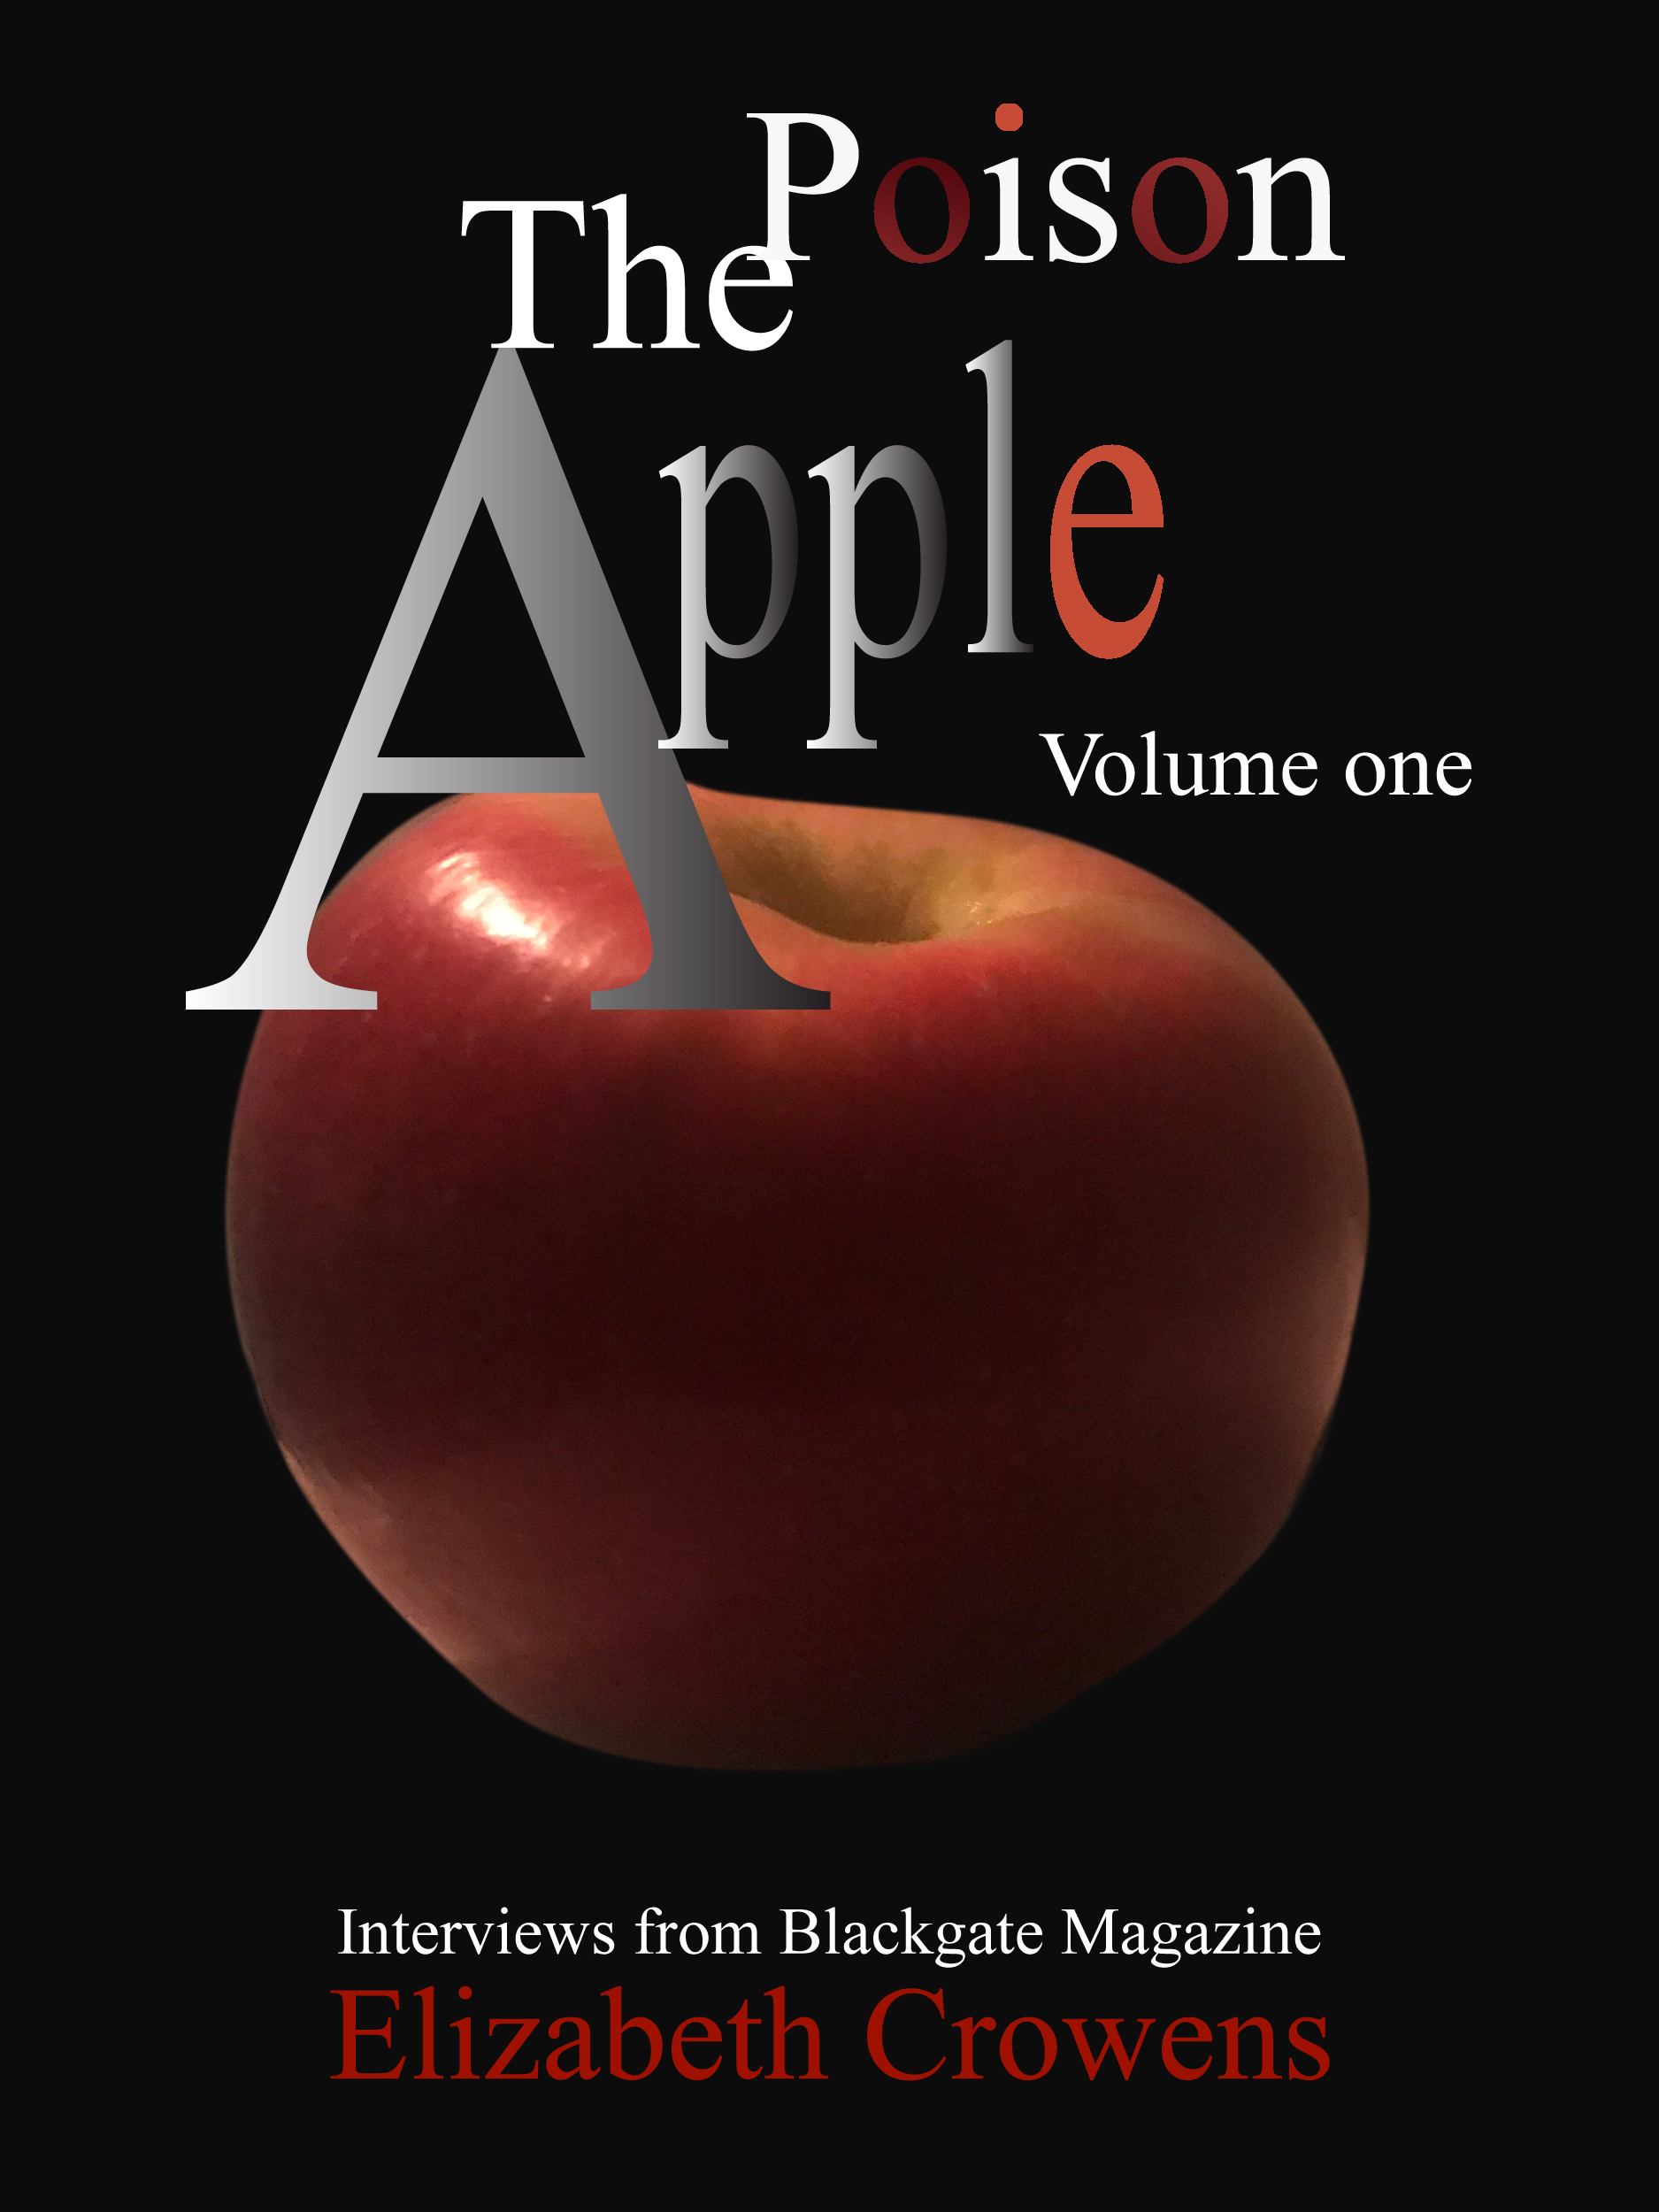 at first bite poison apple book